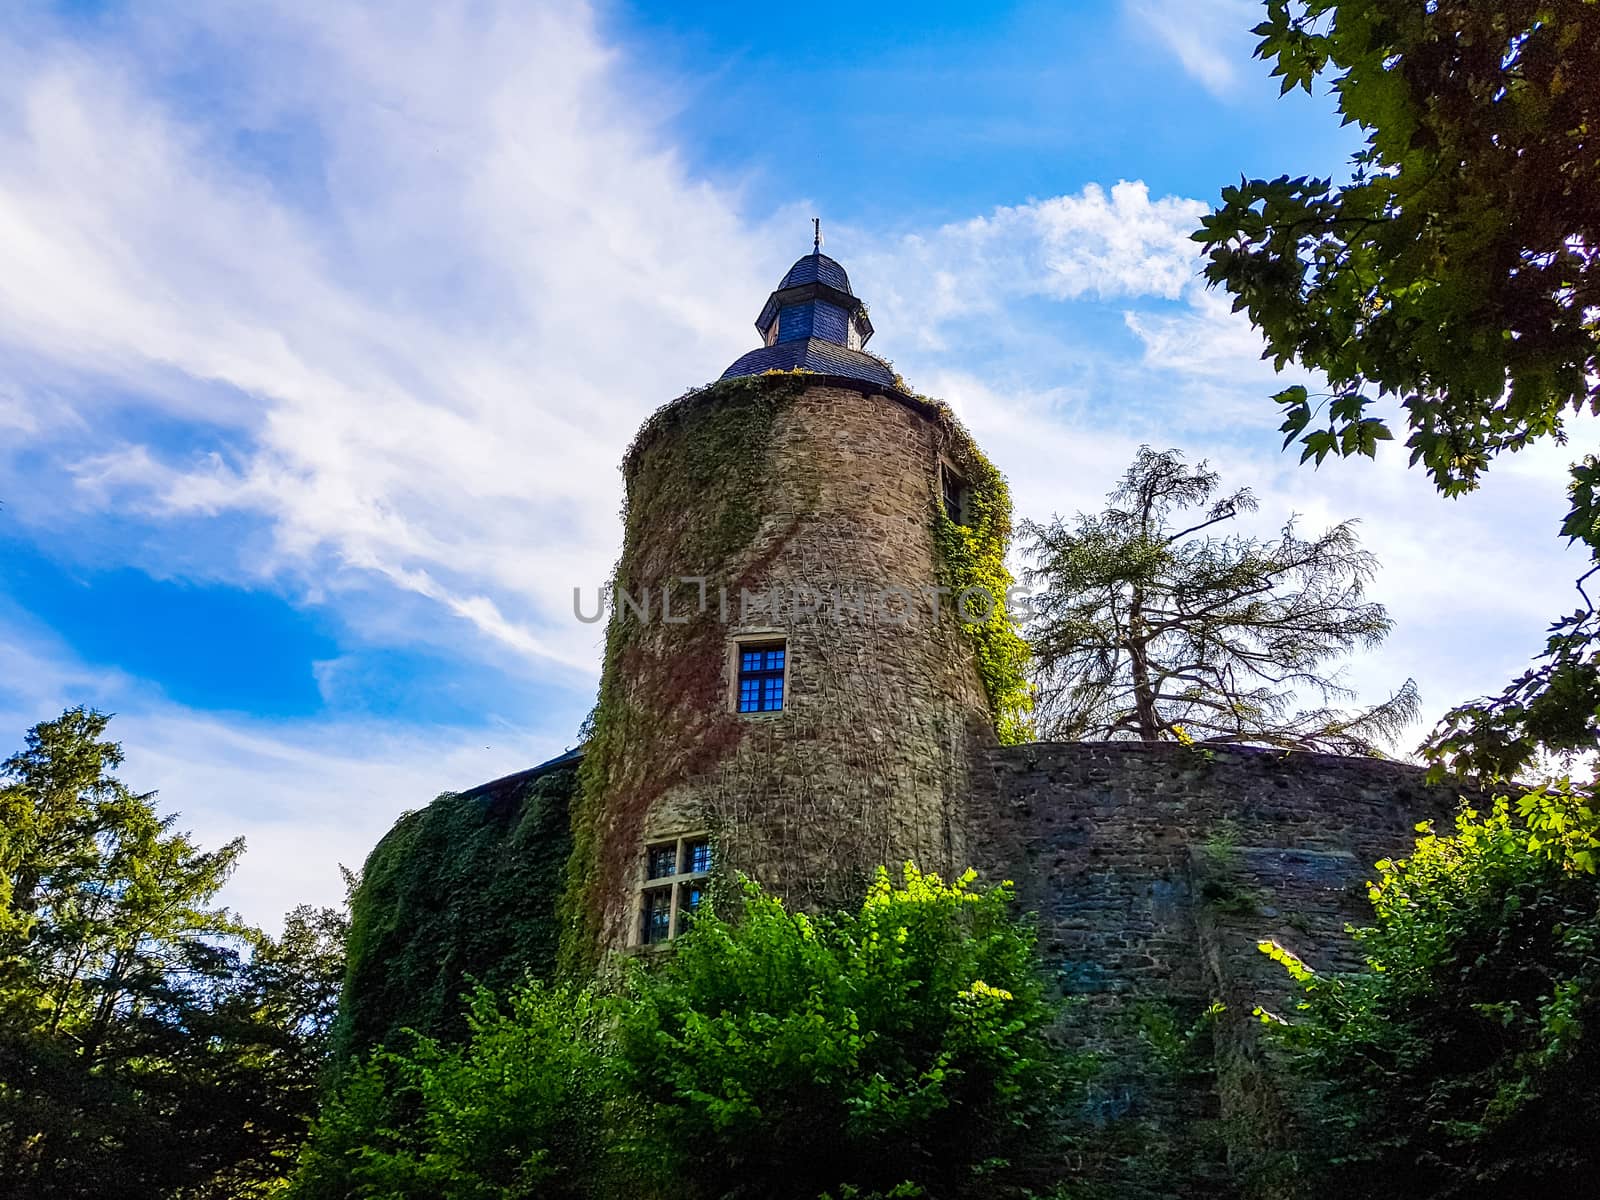 Tower of the medieval hill castle Schloss Landsberg in Germany